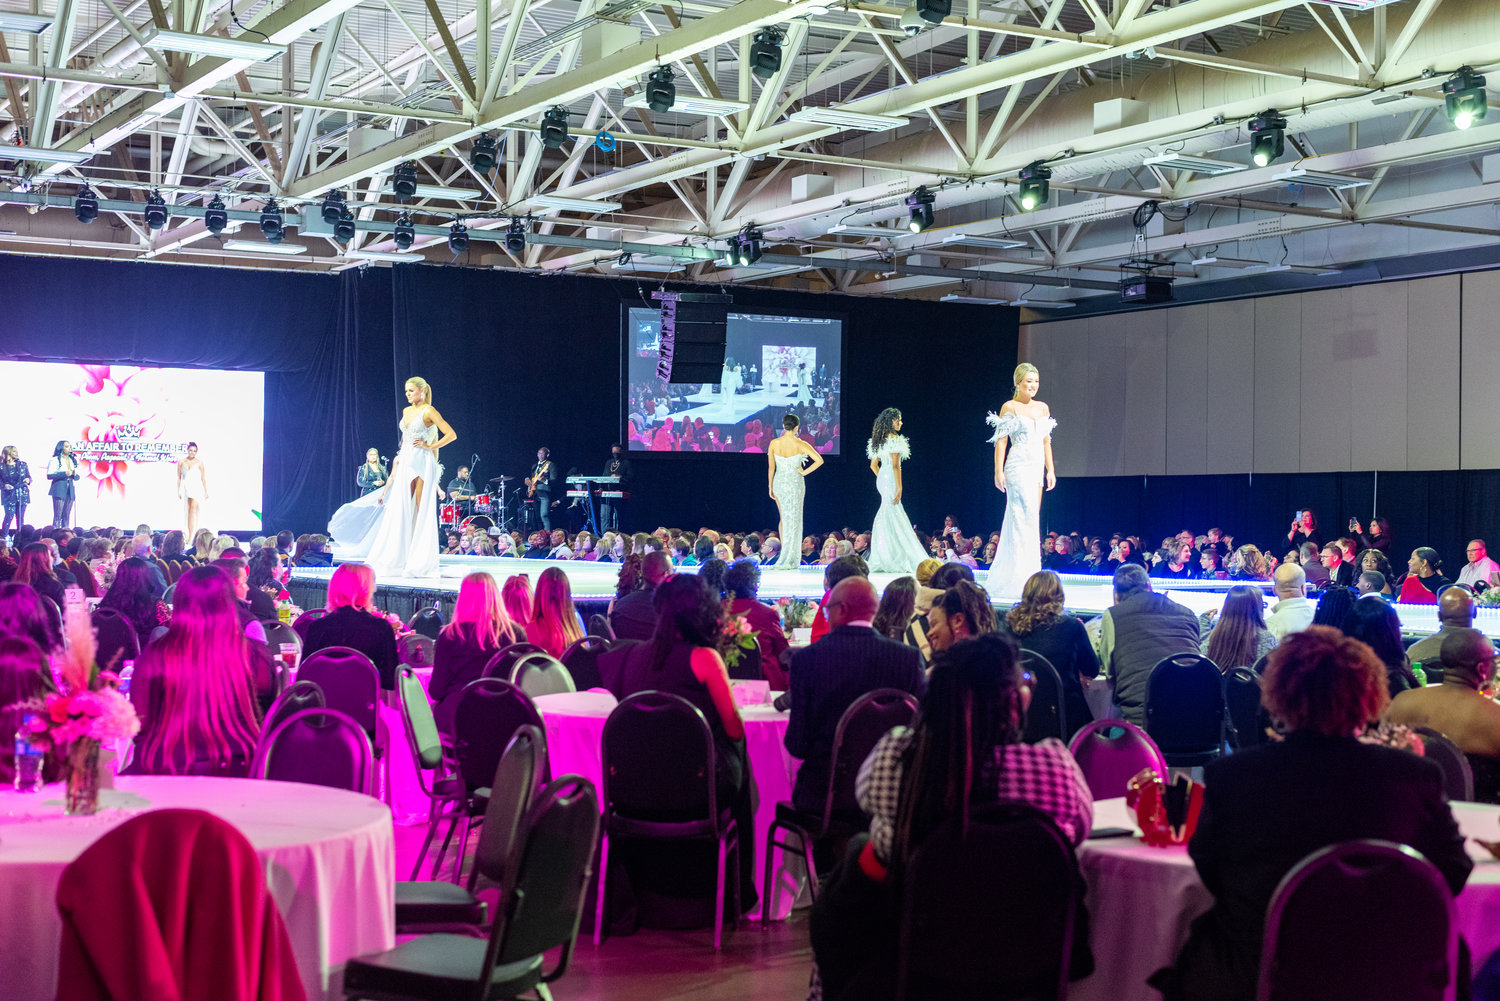 A Runway Extravaganza Fashion Show was presented by An Affair to Remember, took place Jan. 7 at the Crown Expo Center.